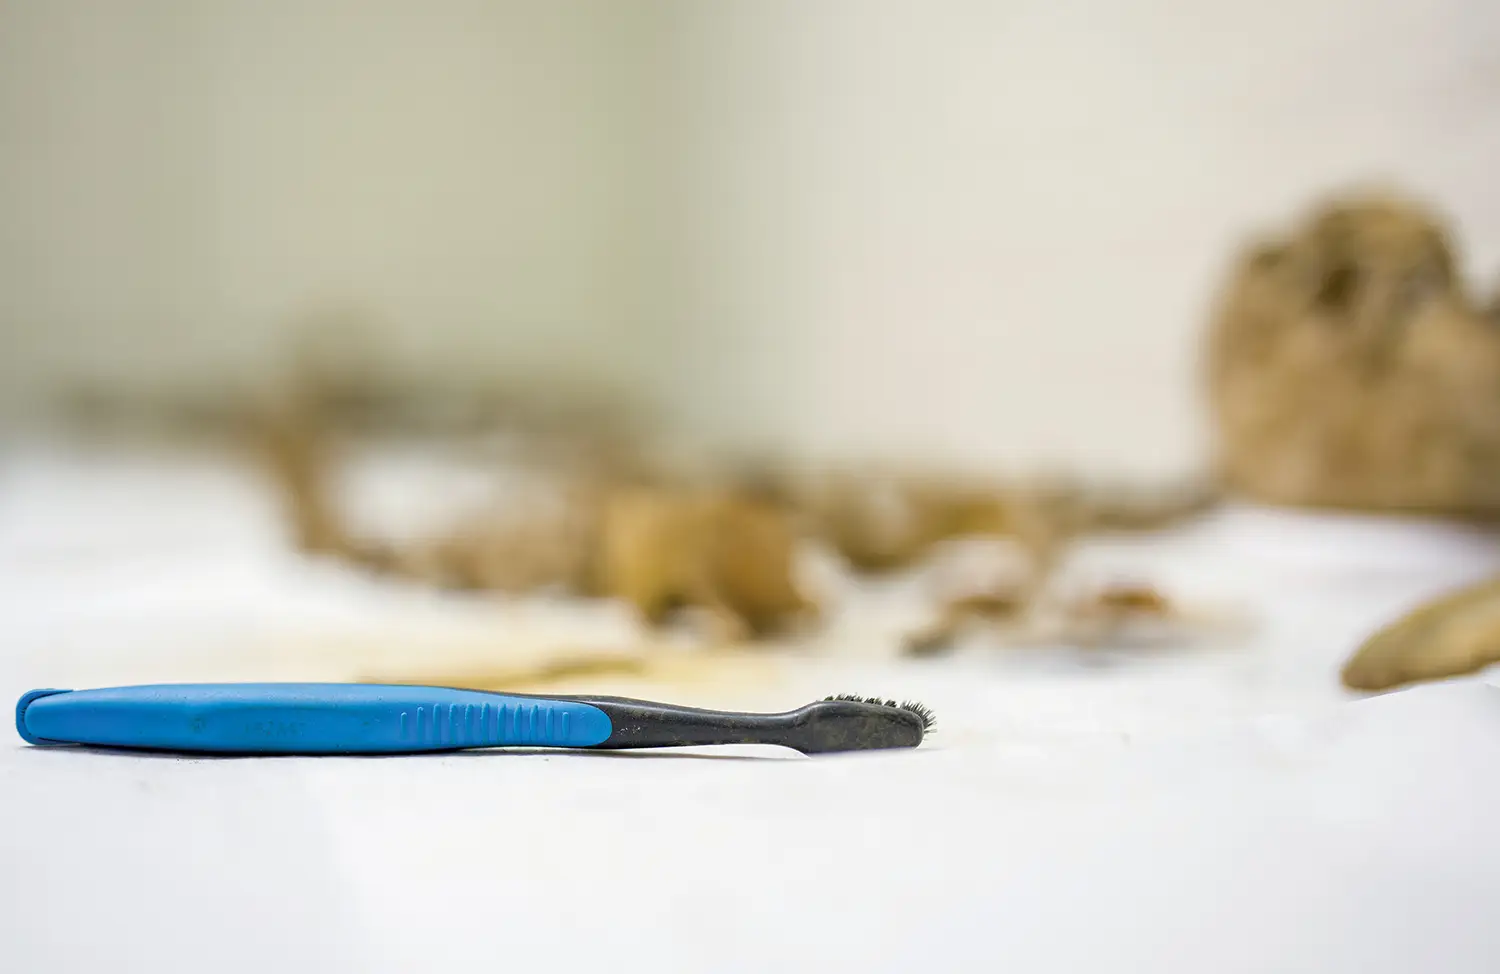 Blue and black toothbrush in foreground with bones out of focus in the background.